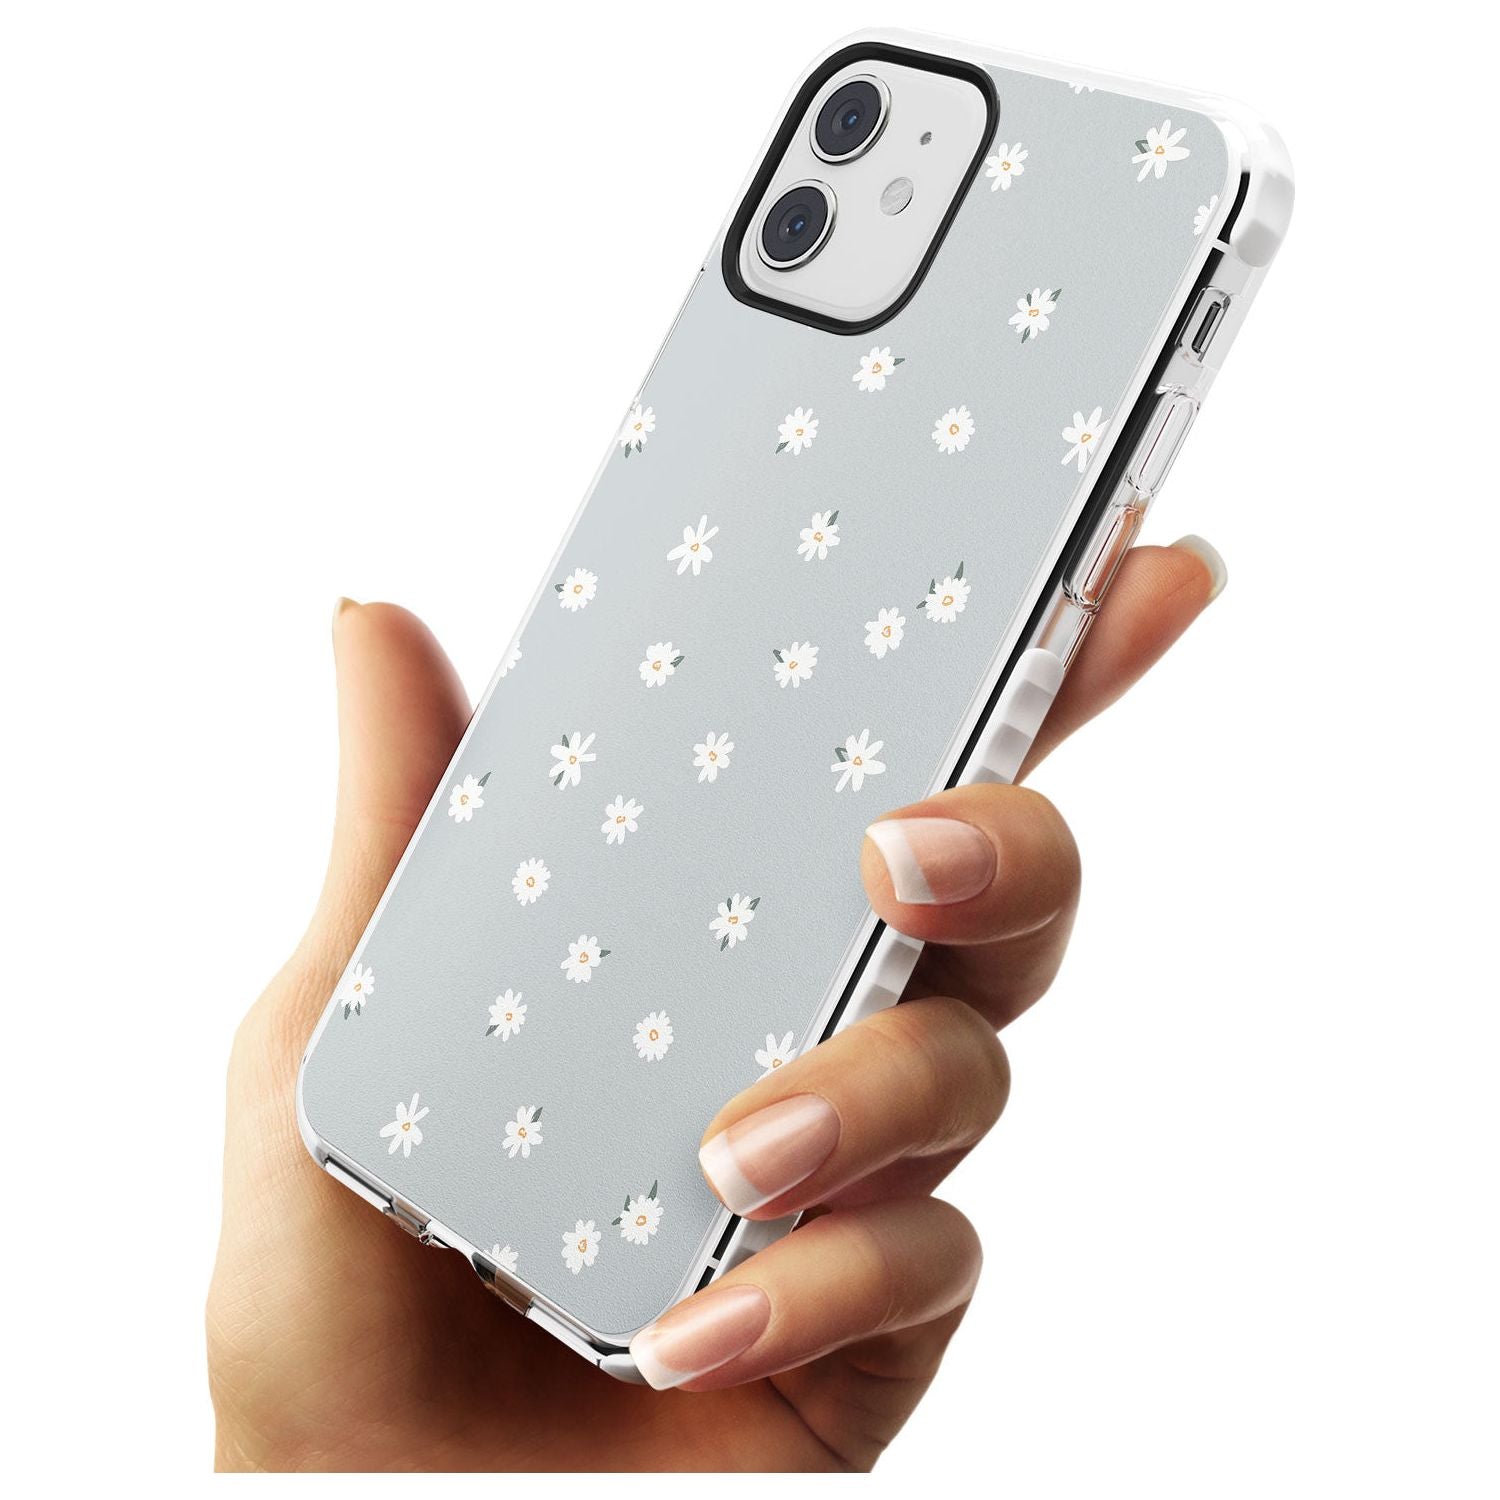 Painted Daises - Blue-Grey Cute Floral Design Slim TPU Phone Case for iPhone 11